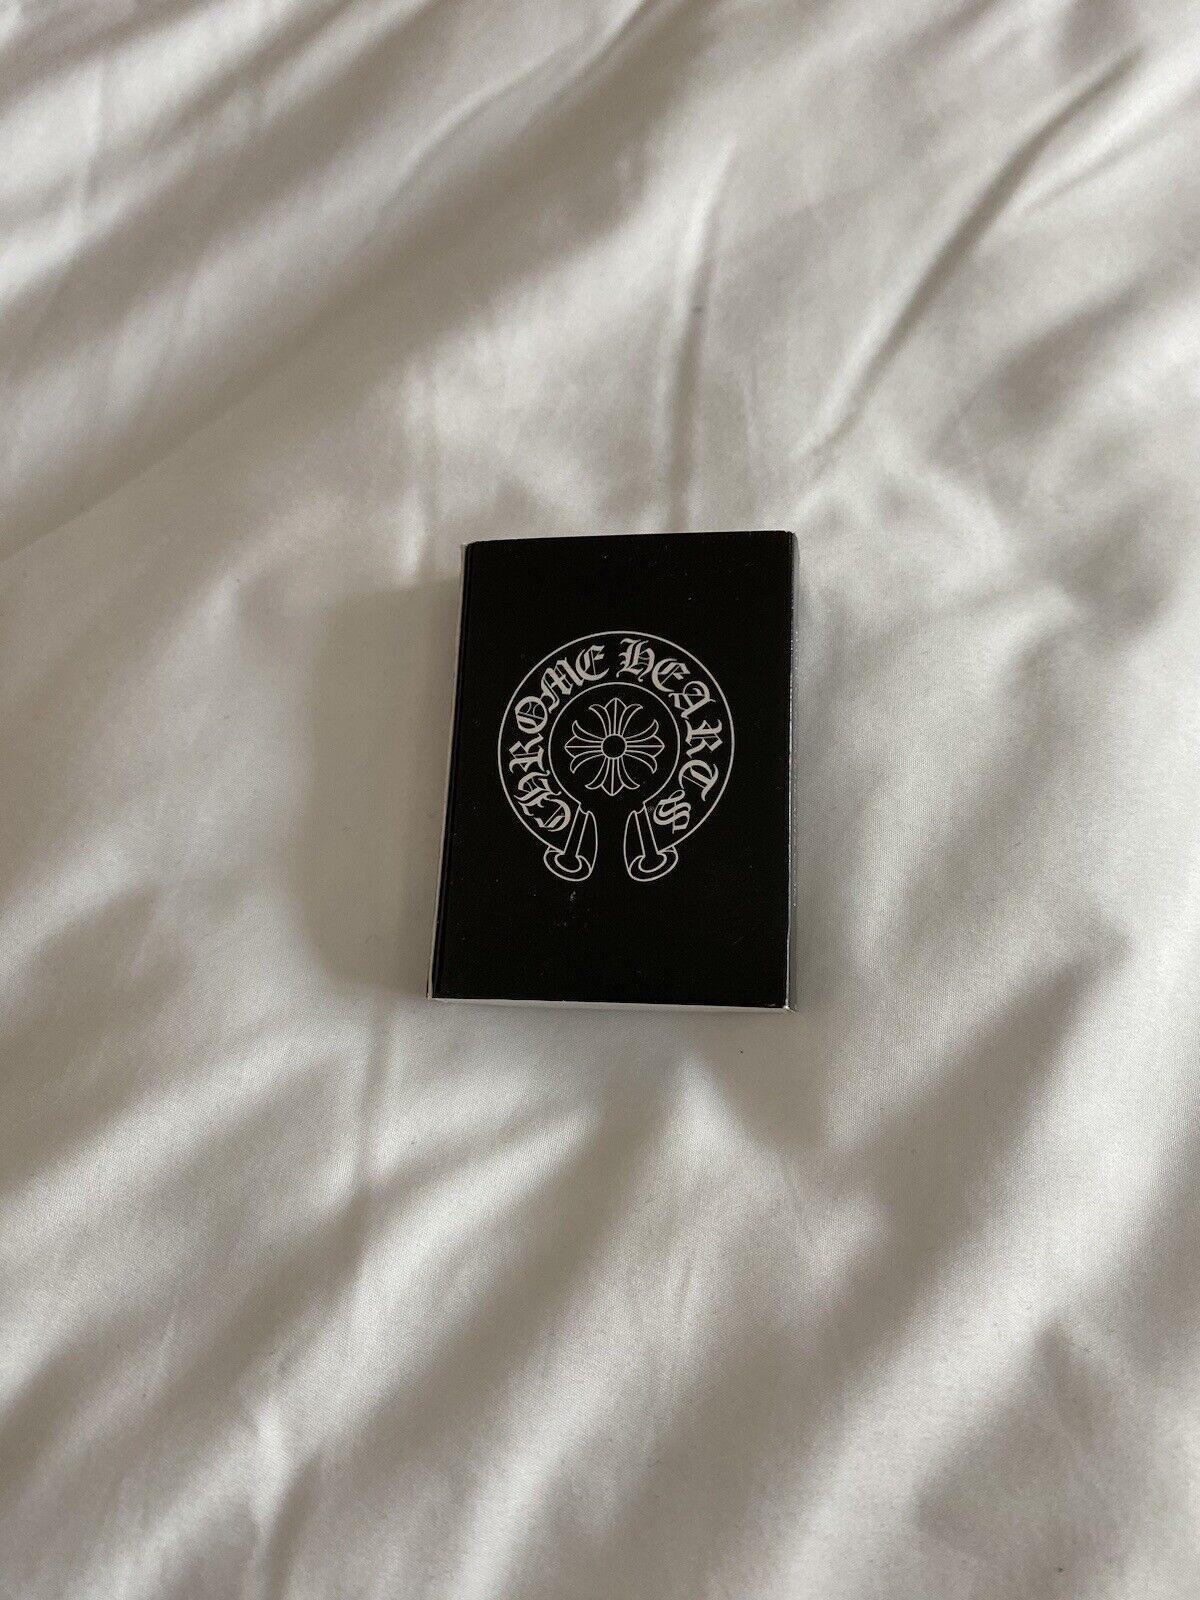 Chrome Hearts matches brand new never used